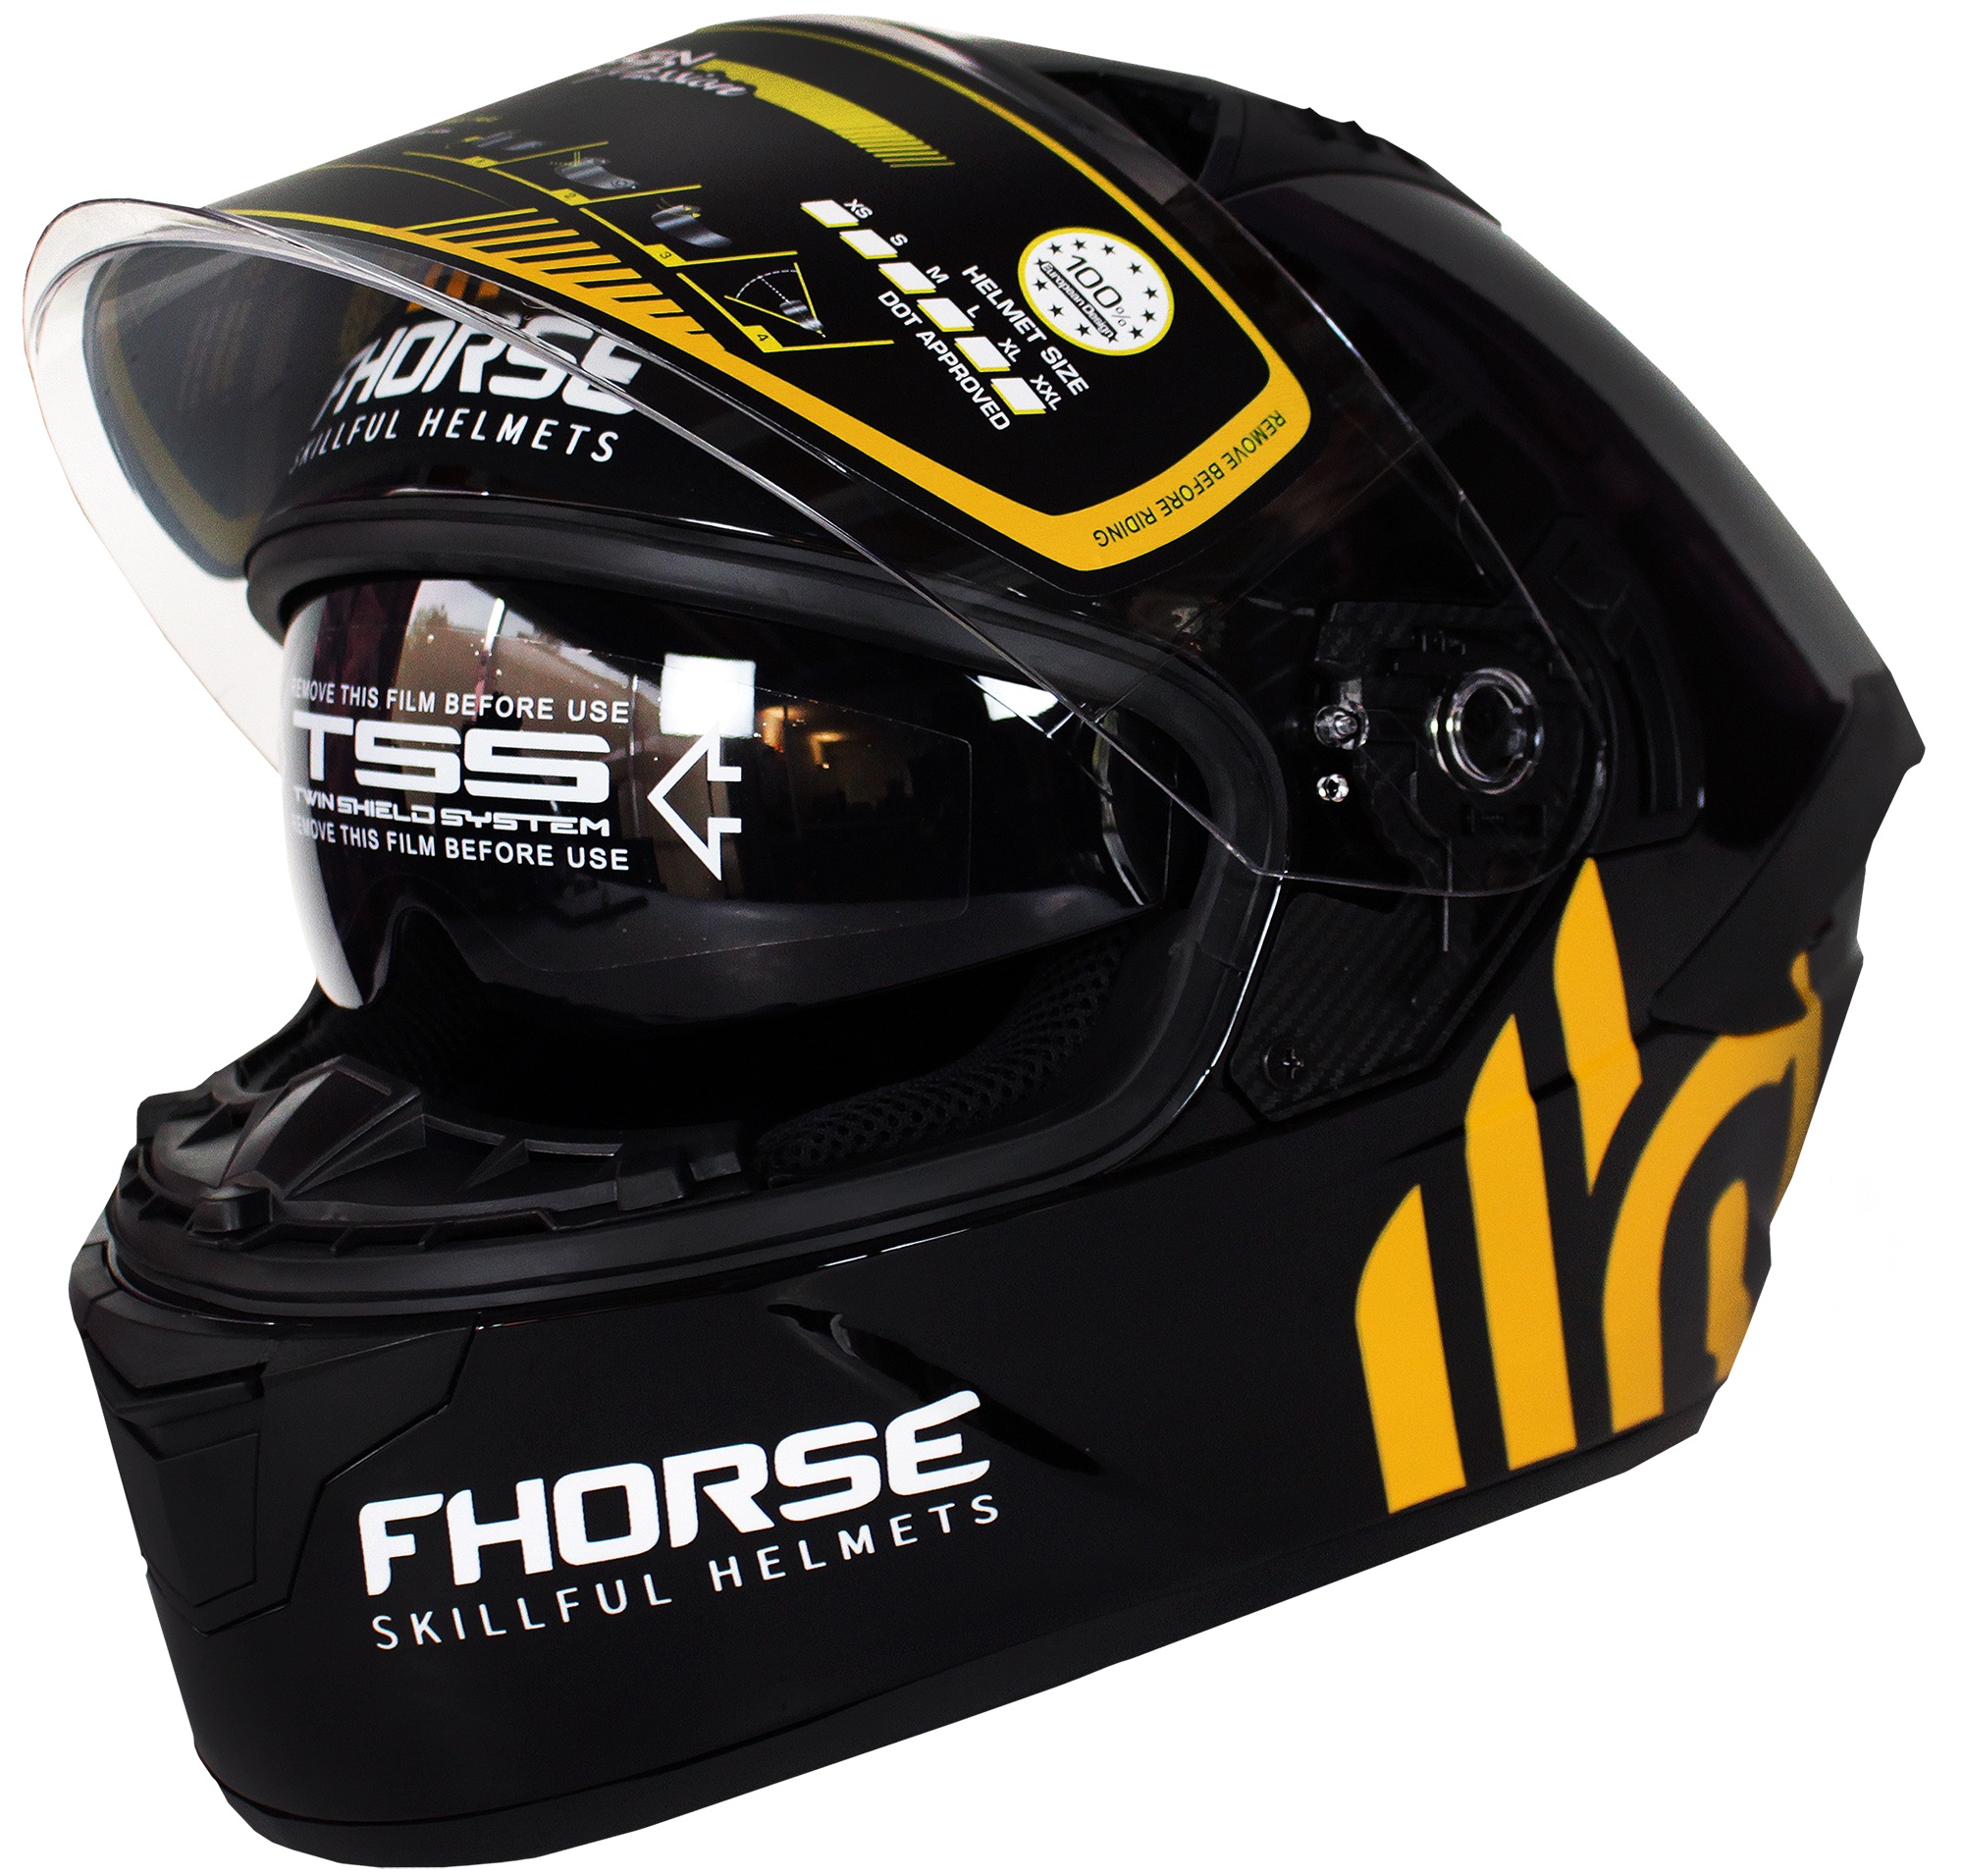 FHorse JH-801 FHorse